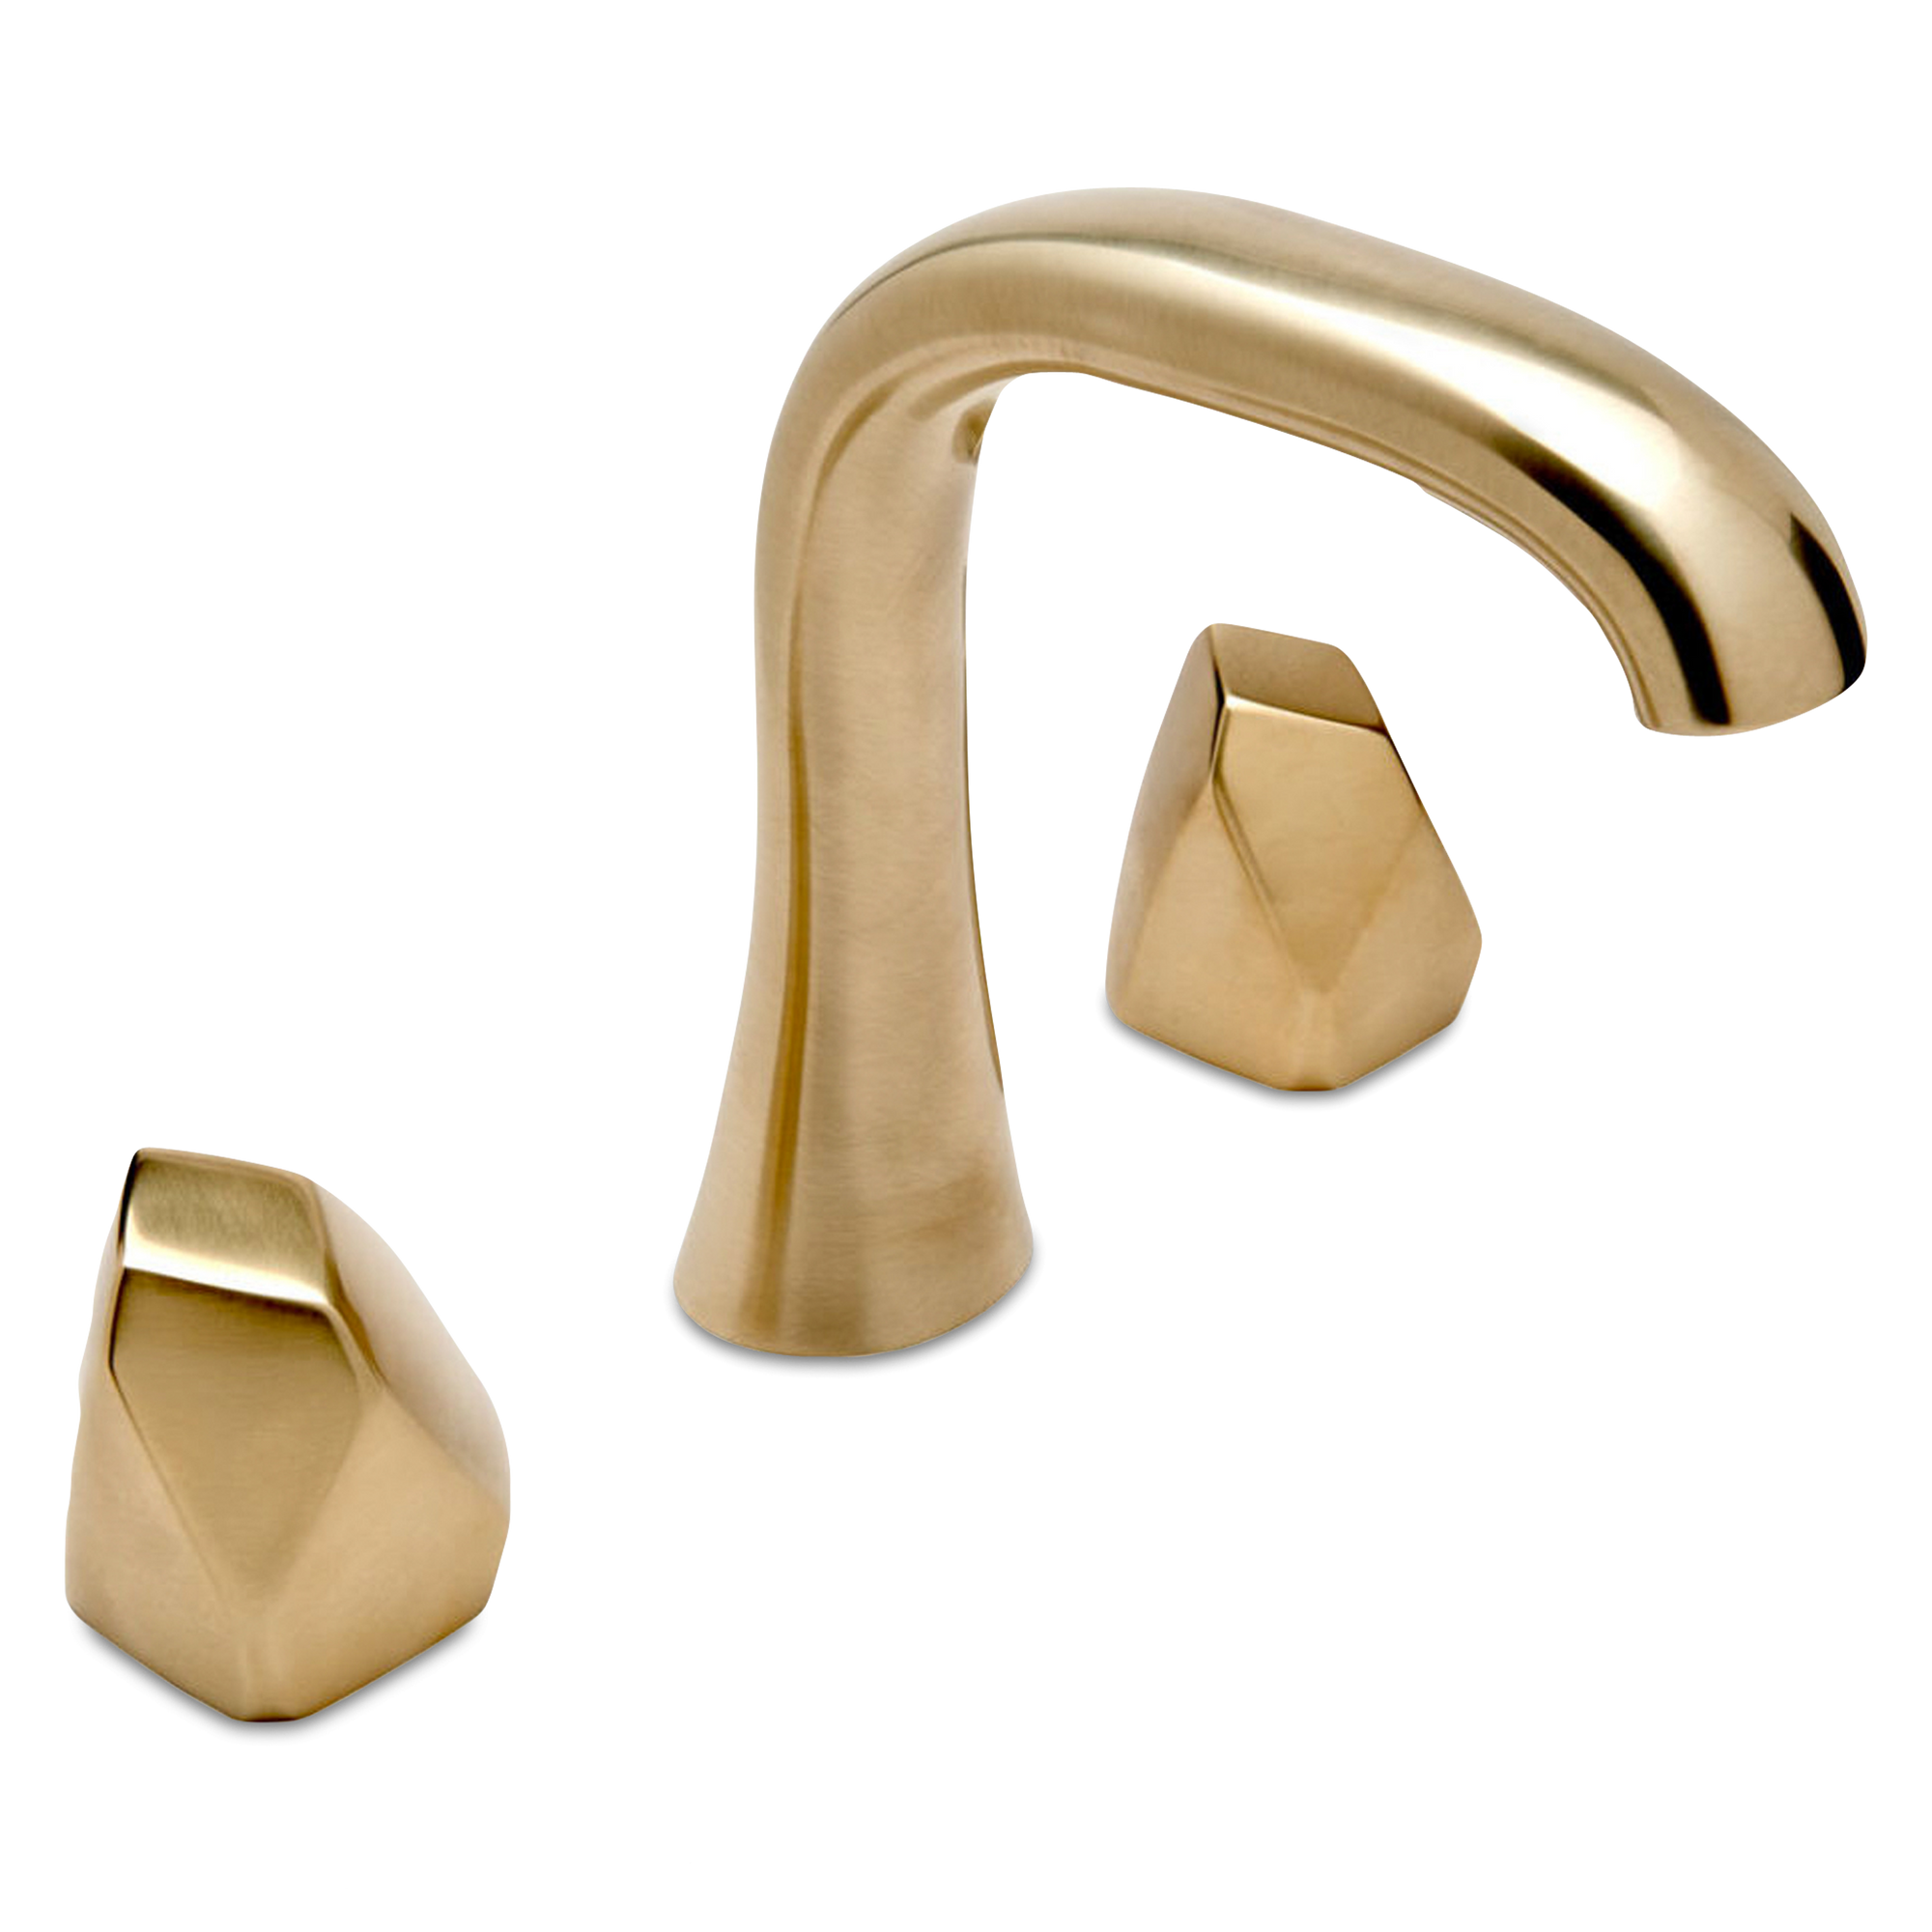 The Waterworks Isla Geode Faucet is pure, timeless, unique and versatile.